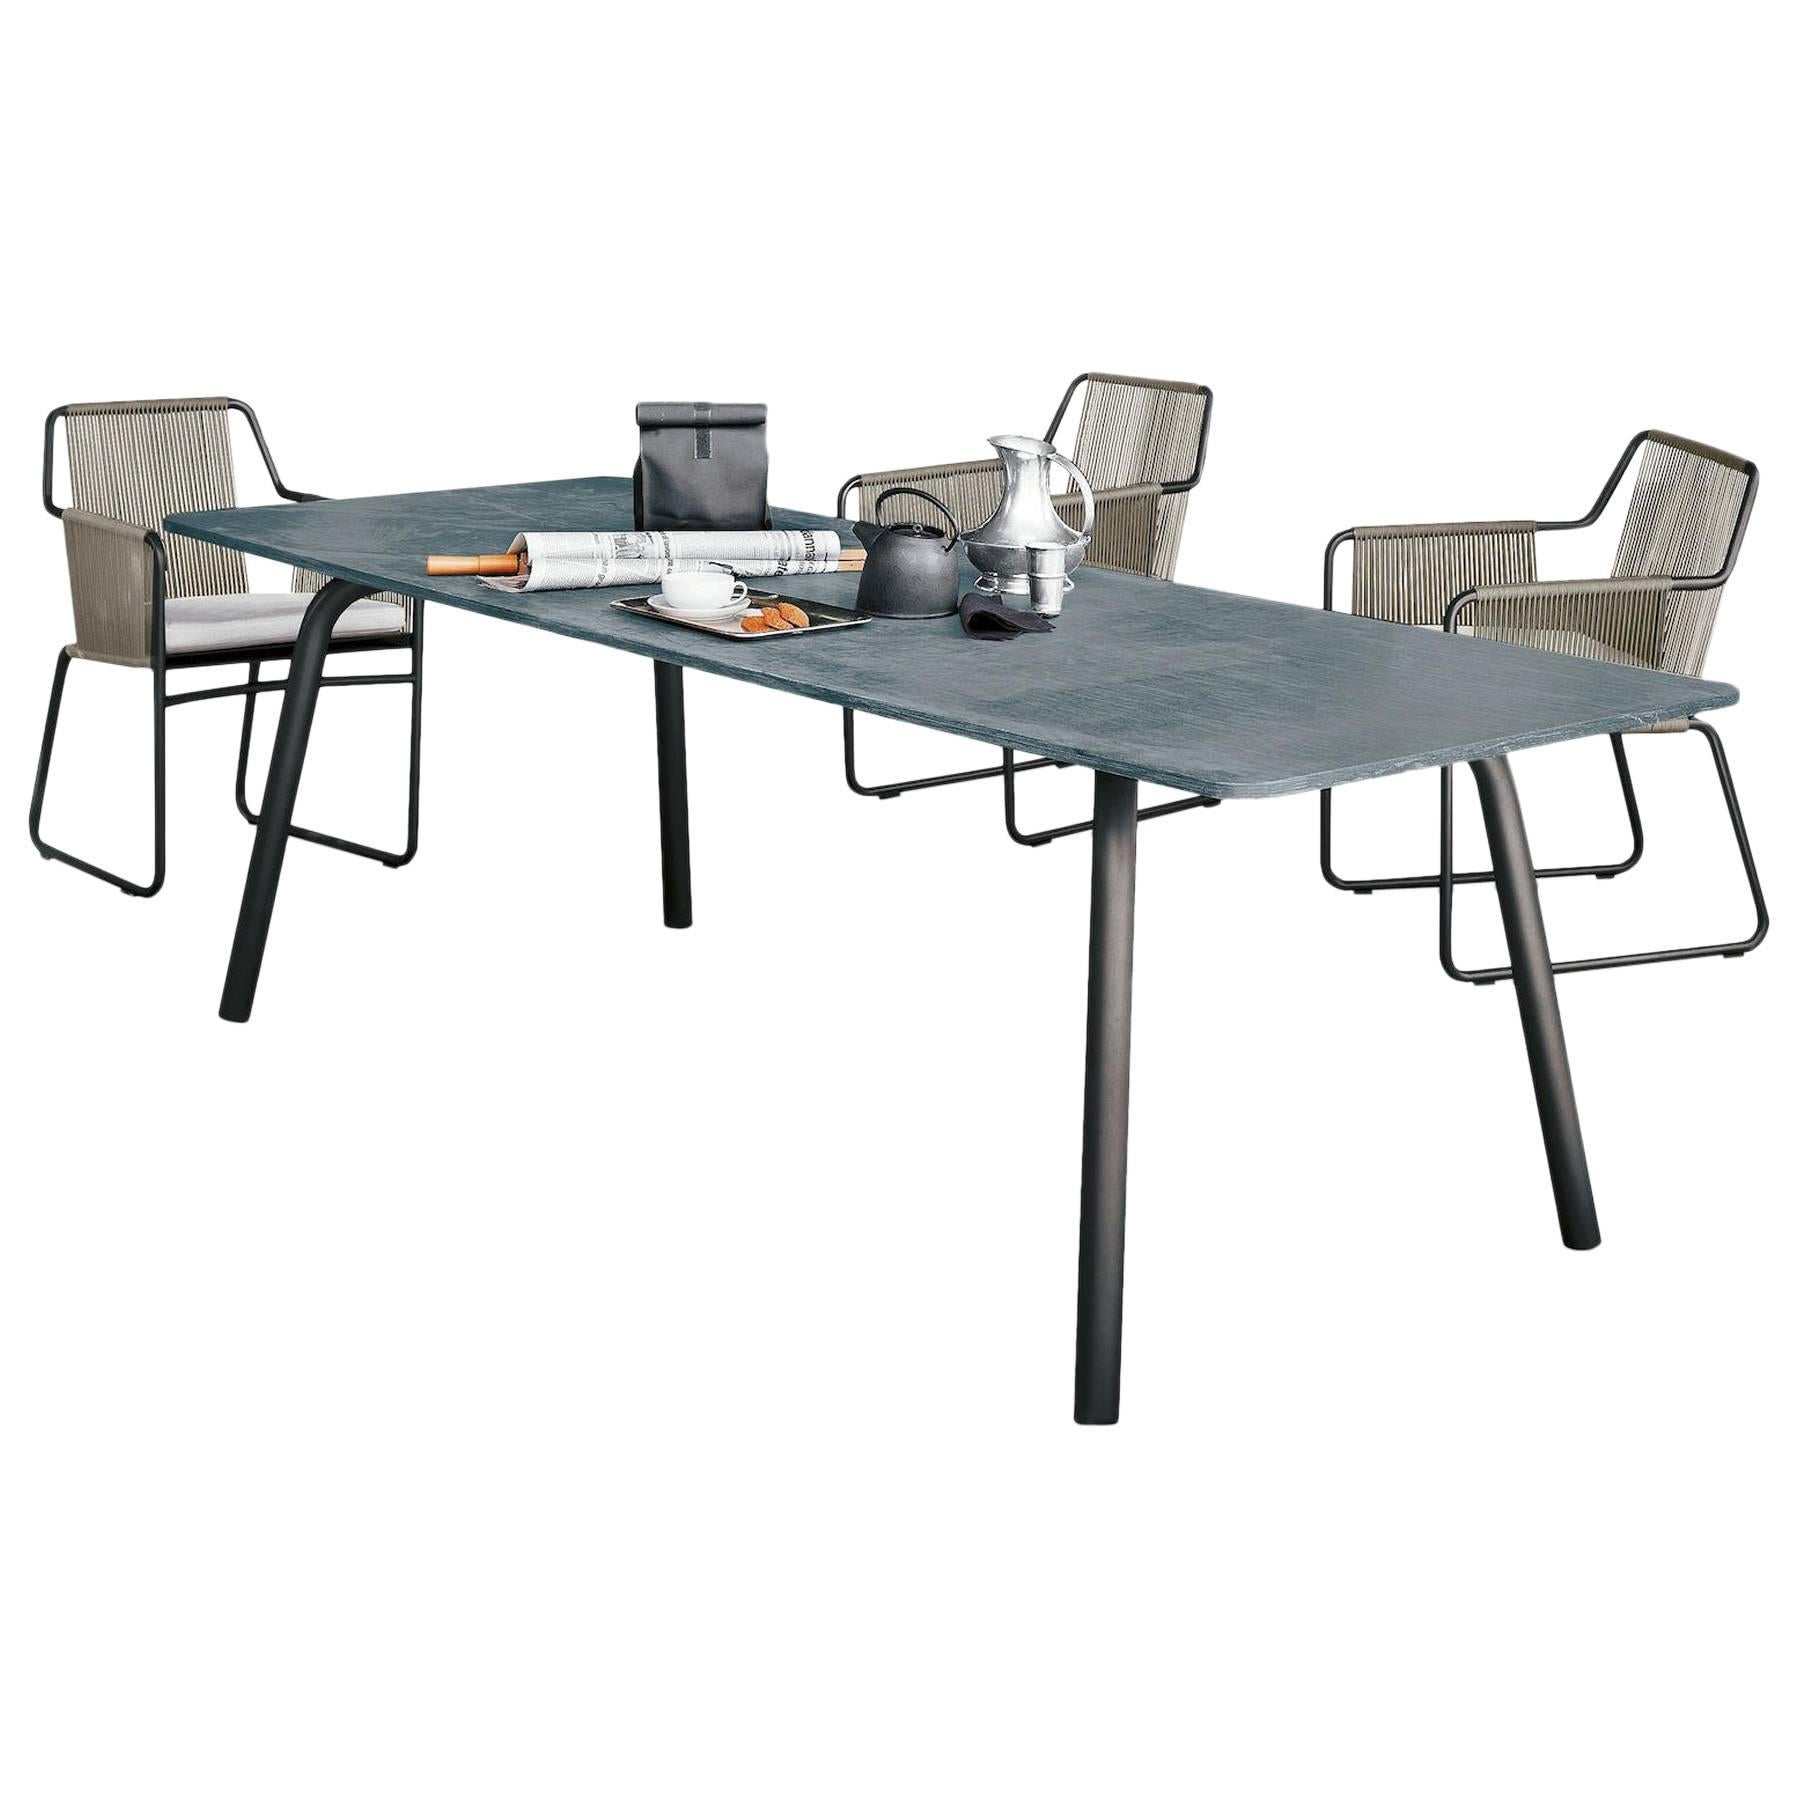 Roda Grasshopper Dining Table for Outdoor/Indoor Use for Eight-Ten People For Sale